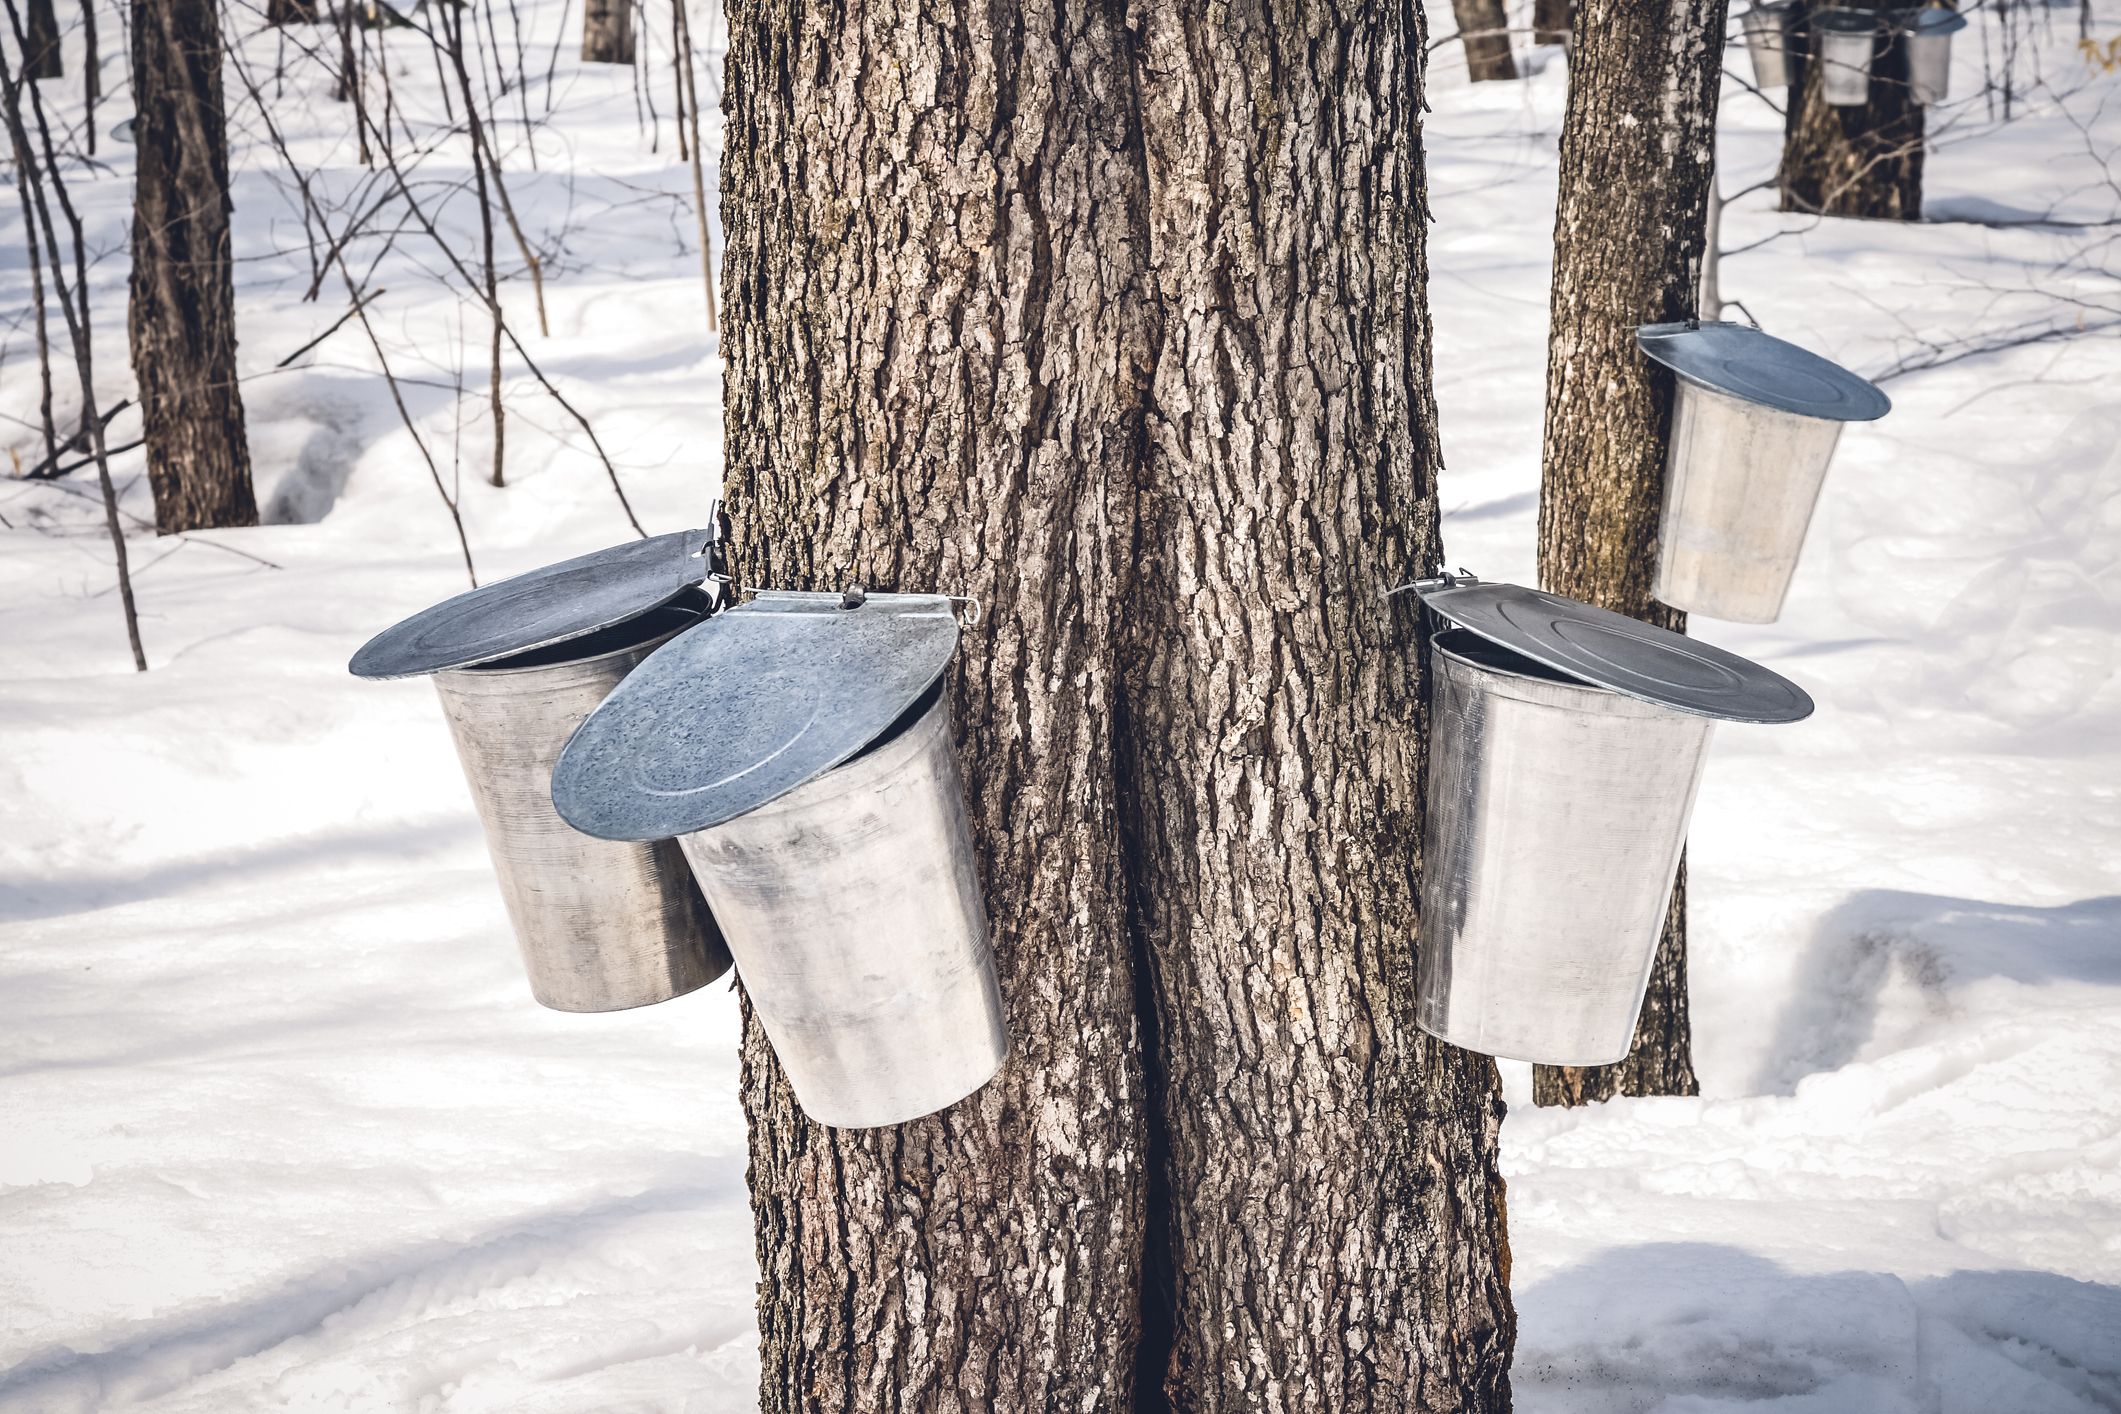 Maple trees with buckets attached to them to collect sap. 